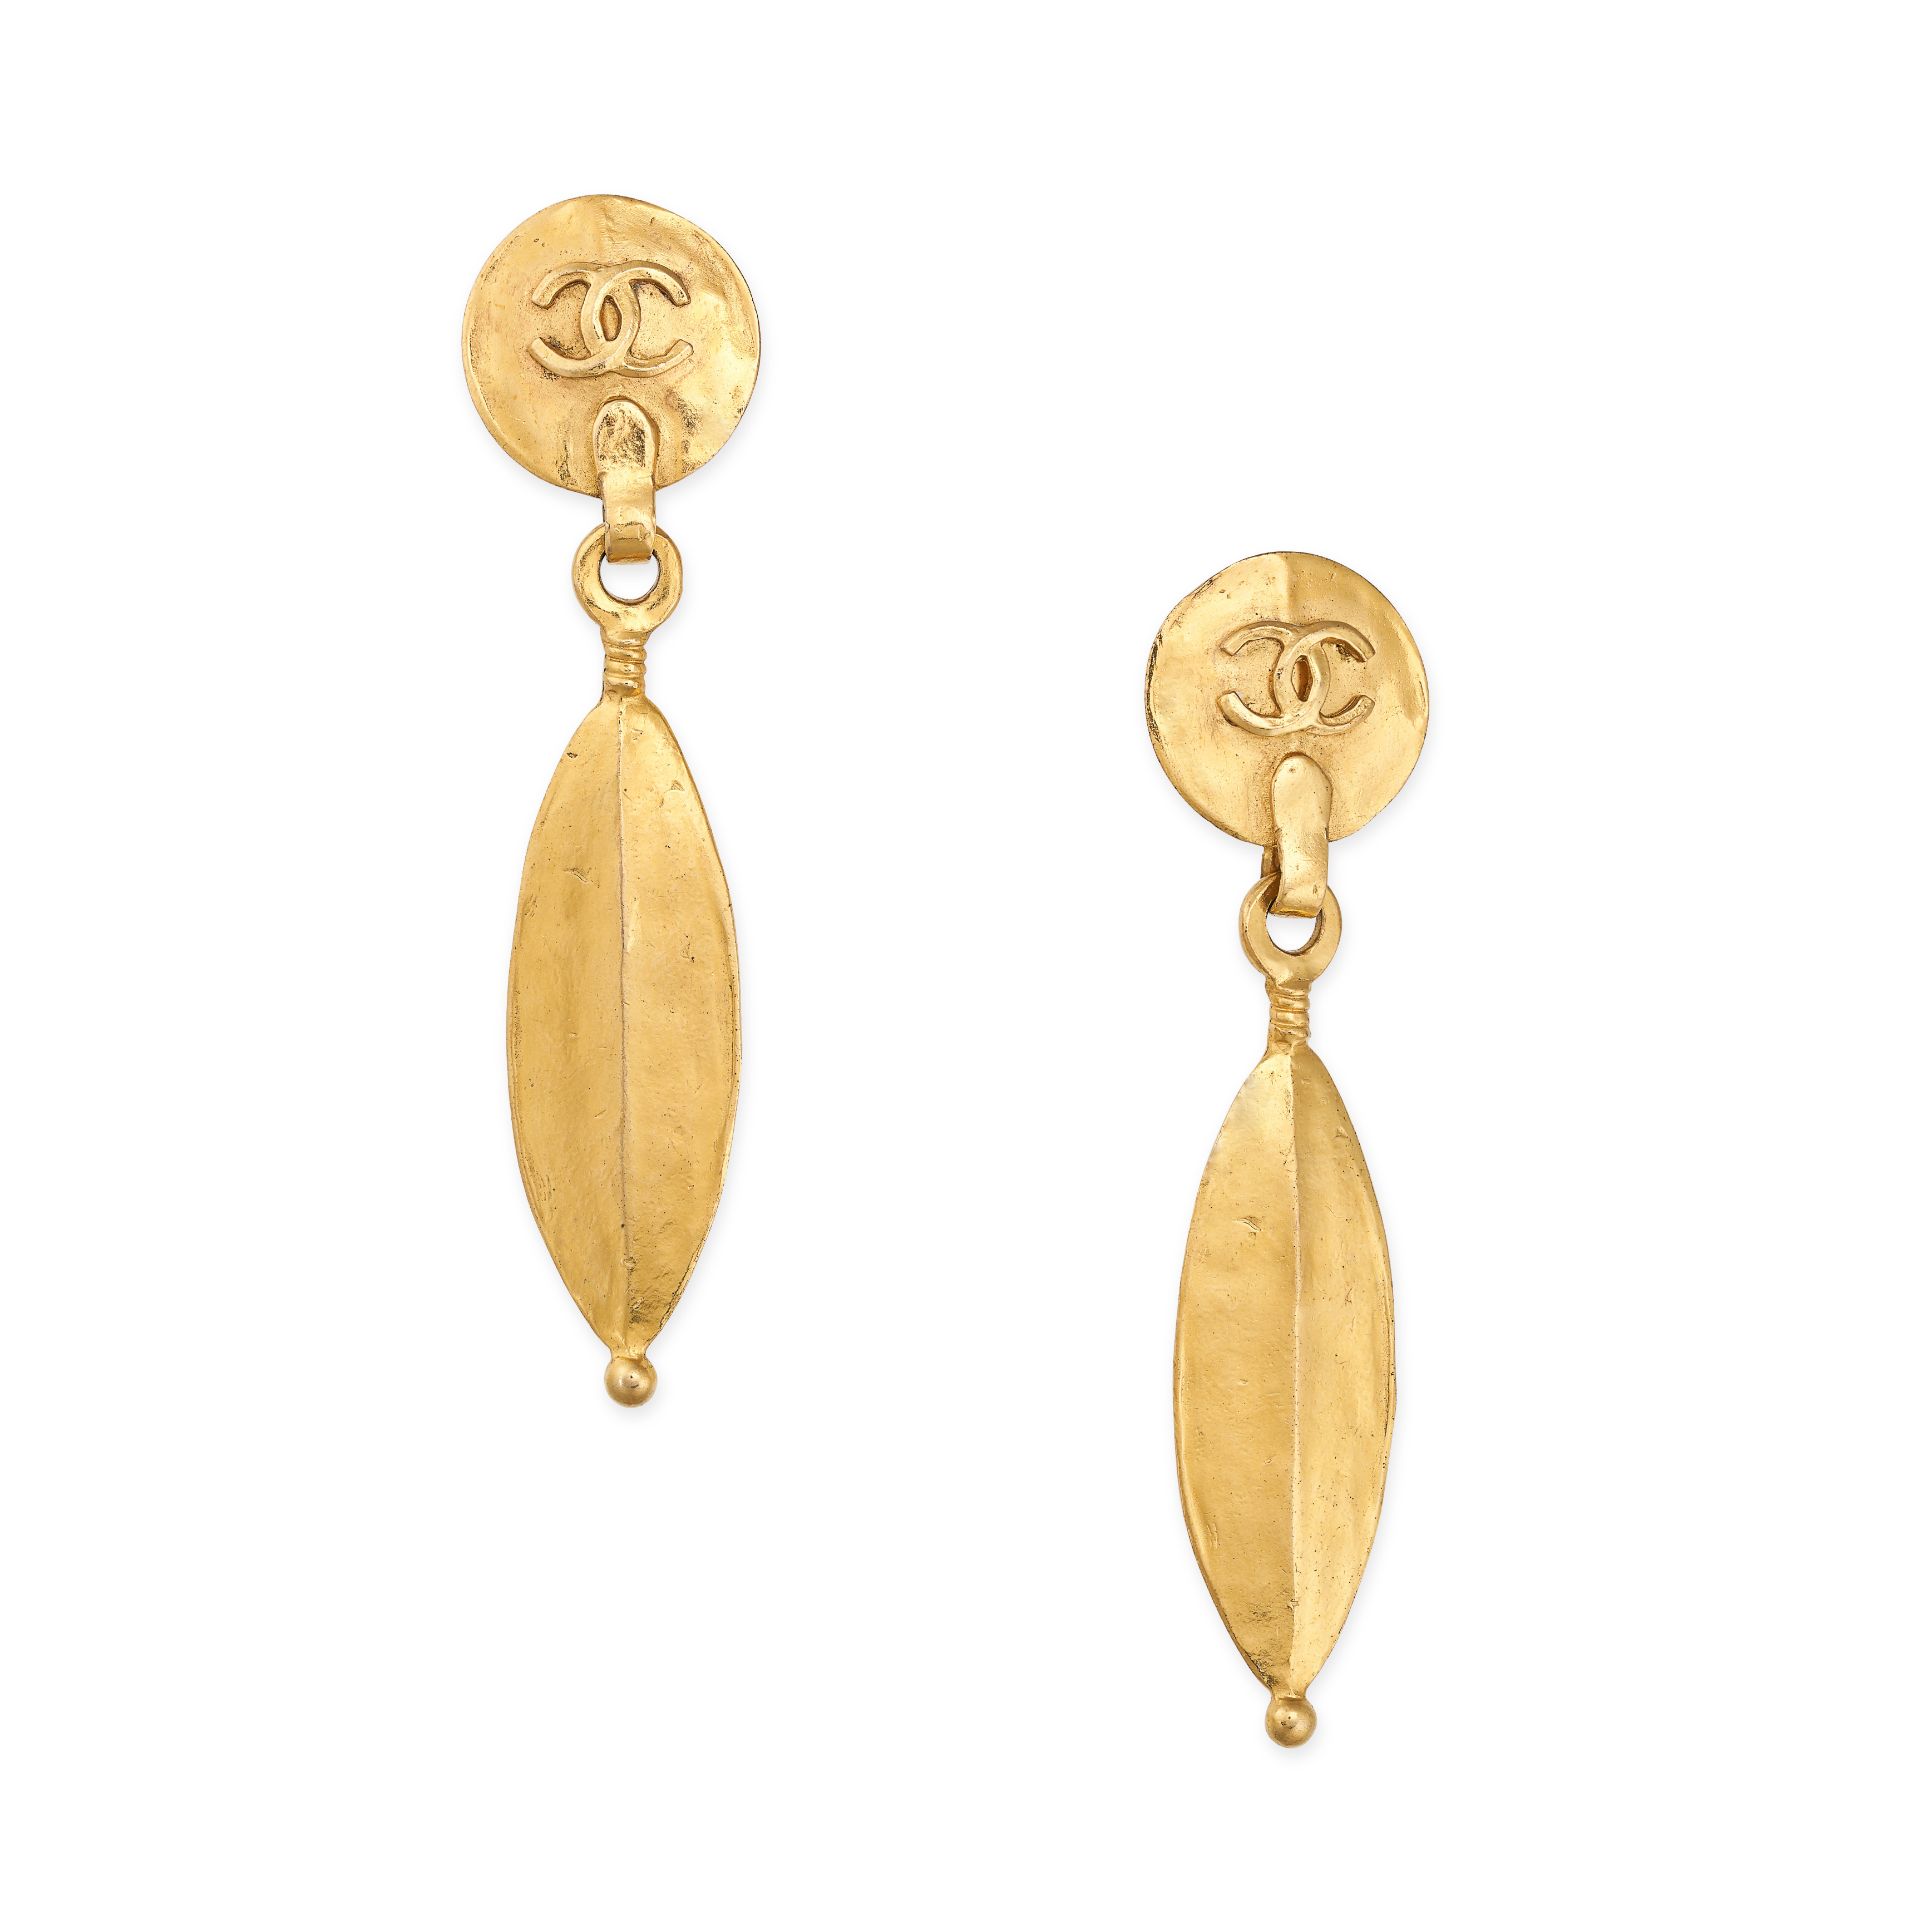 NO RESERVE - CHANEL, A PAIR OF VINTAGE DROP EARRINGS each comprising a circular motif with an app...